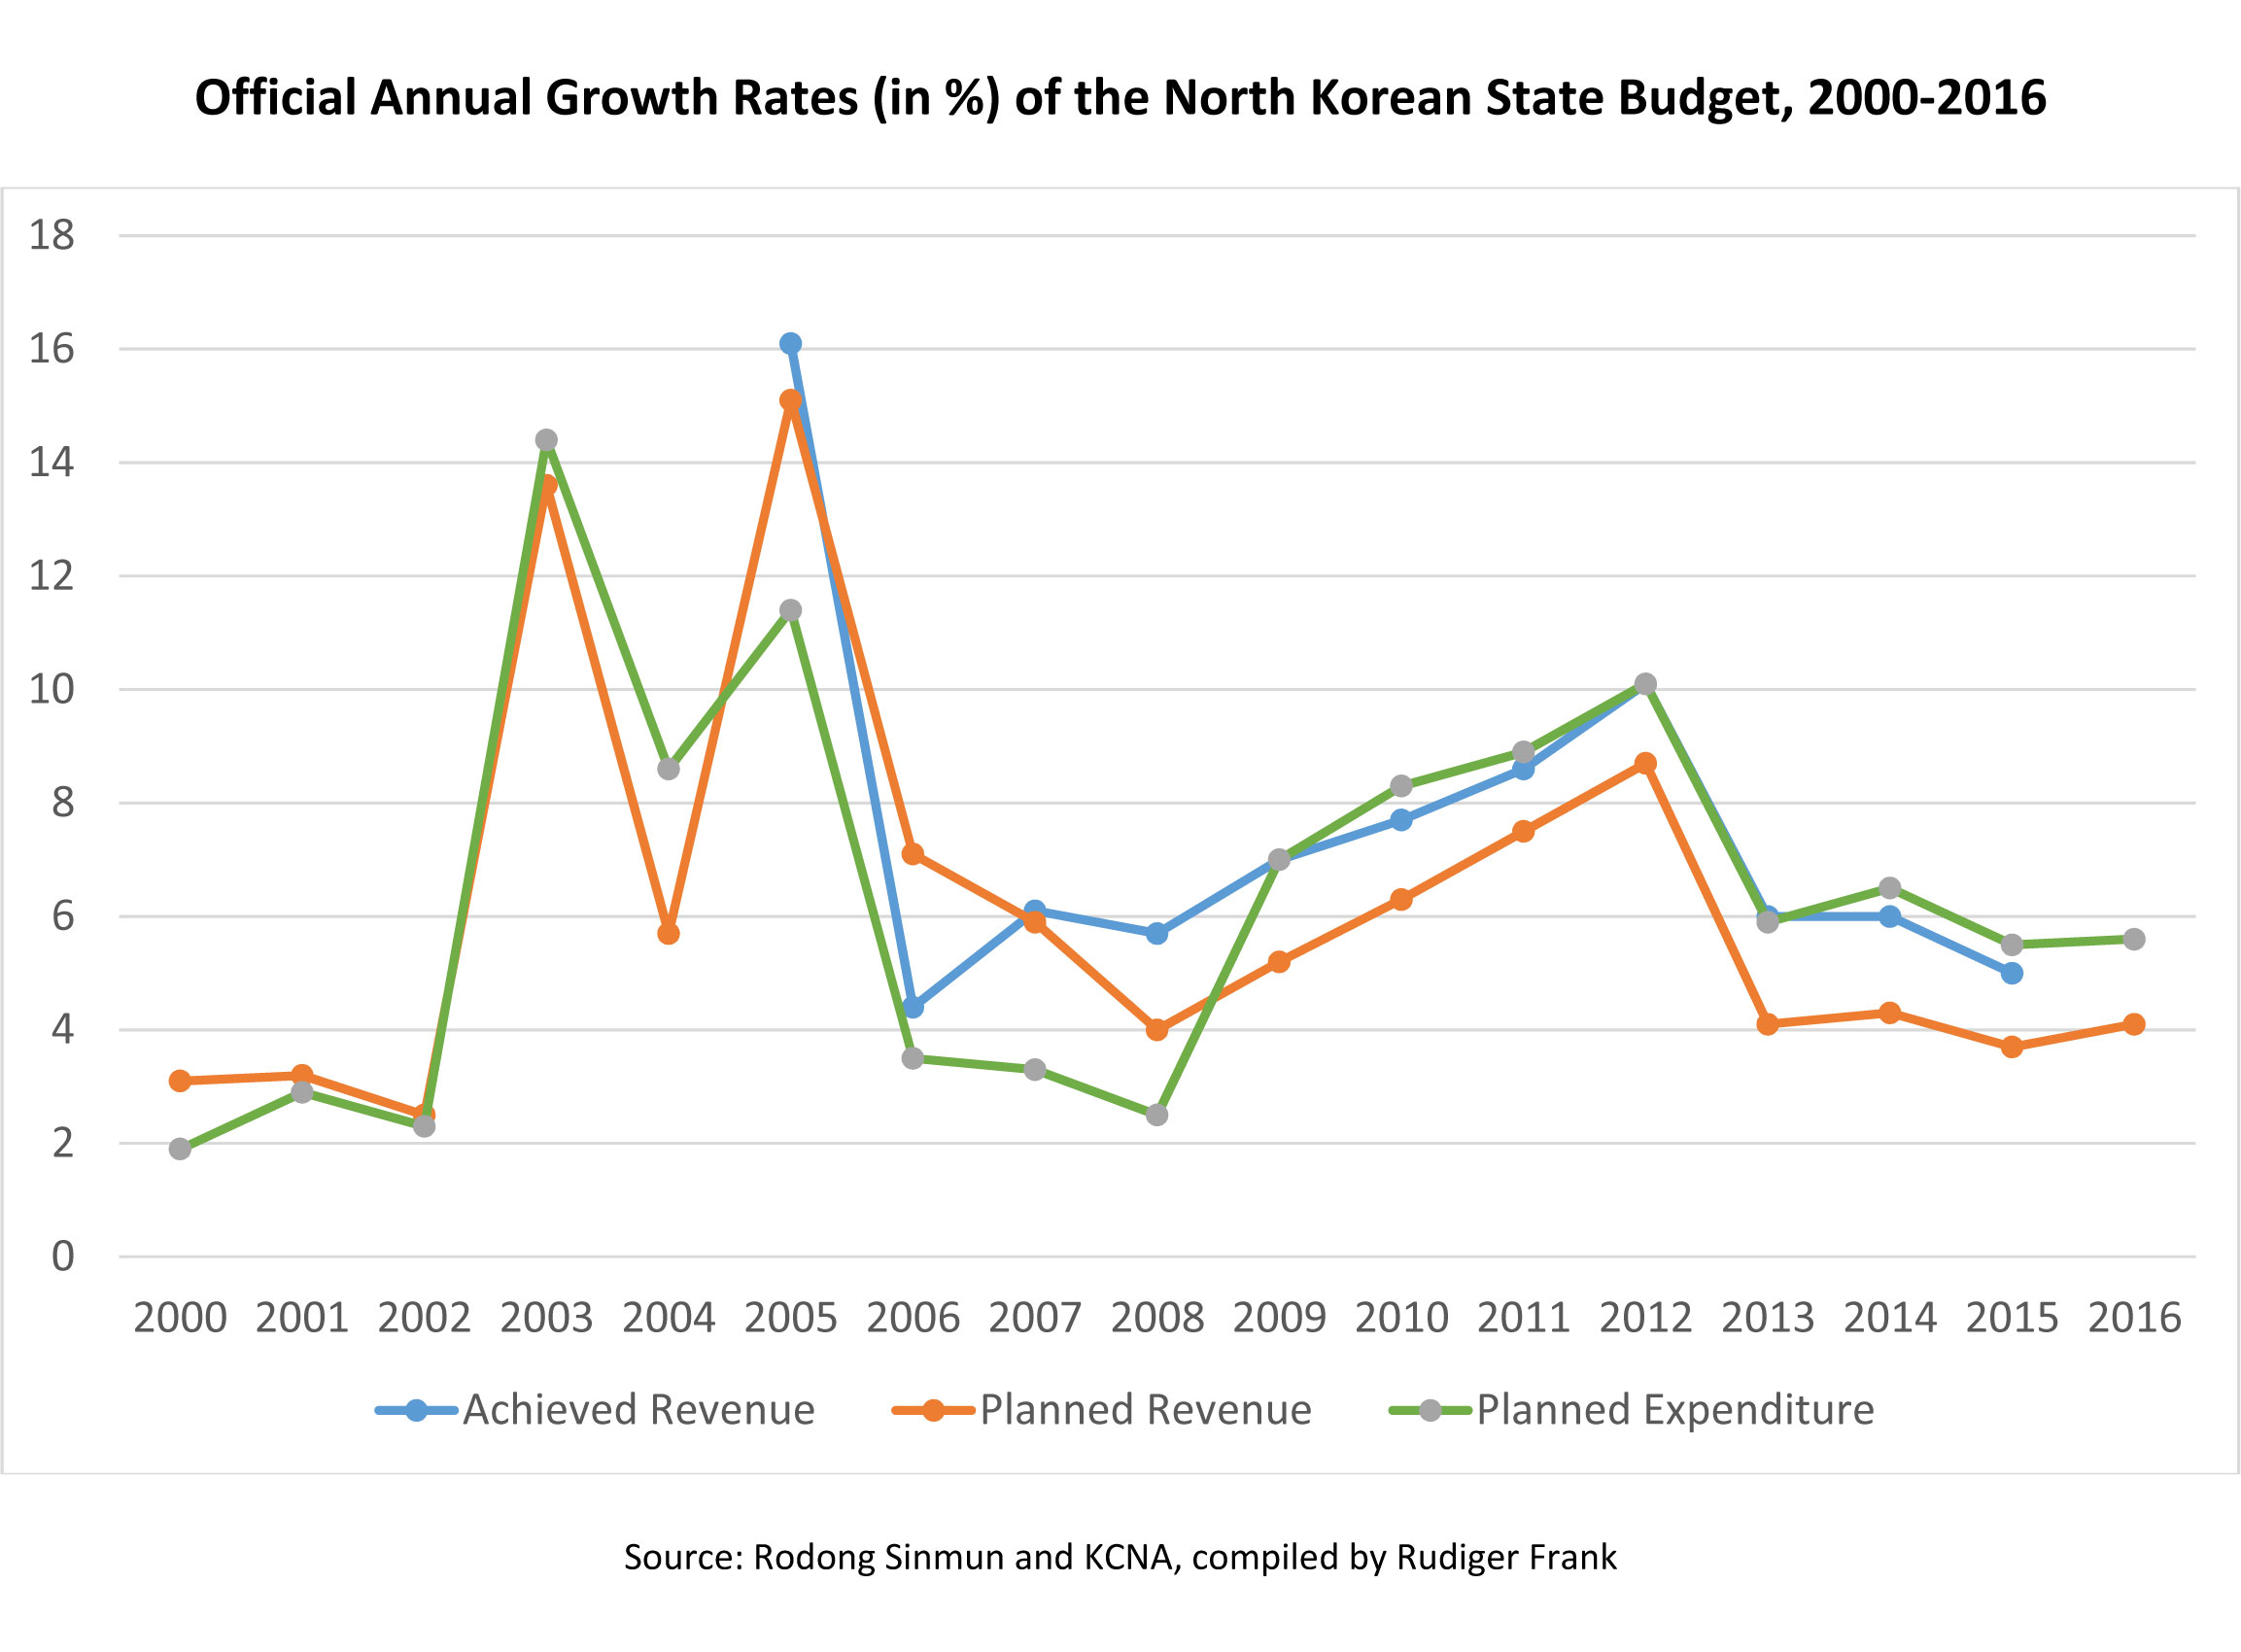 Official Annual Growth Rates of the North Korean State Budget, 2000-2016